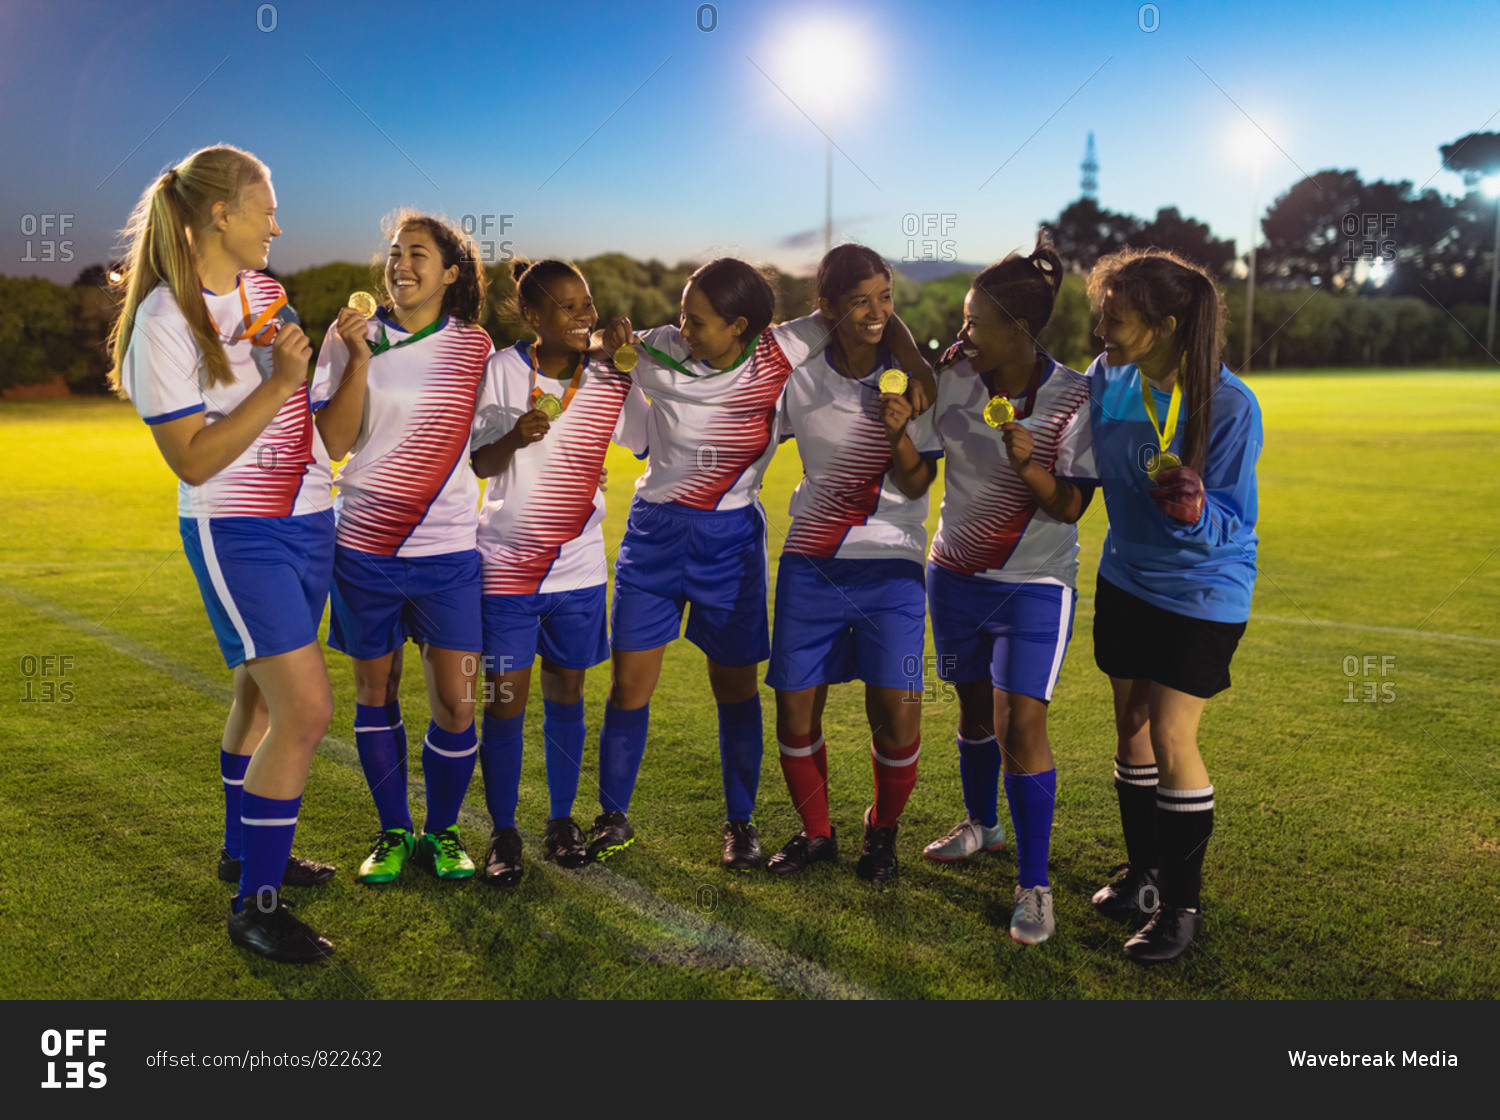 Front view of diverse female soccer team showing medal to each other at sports field